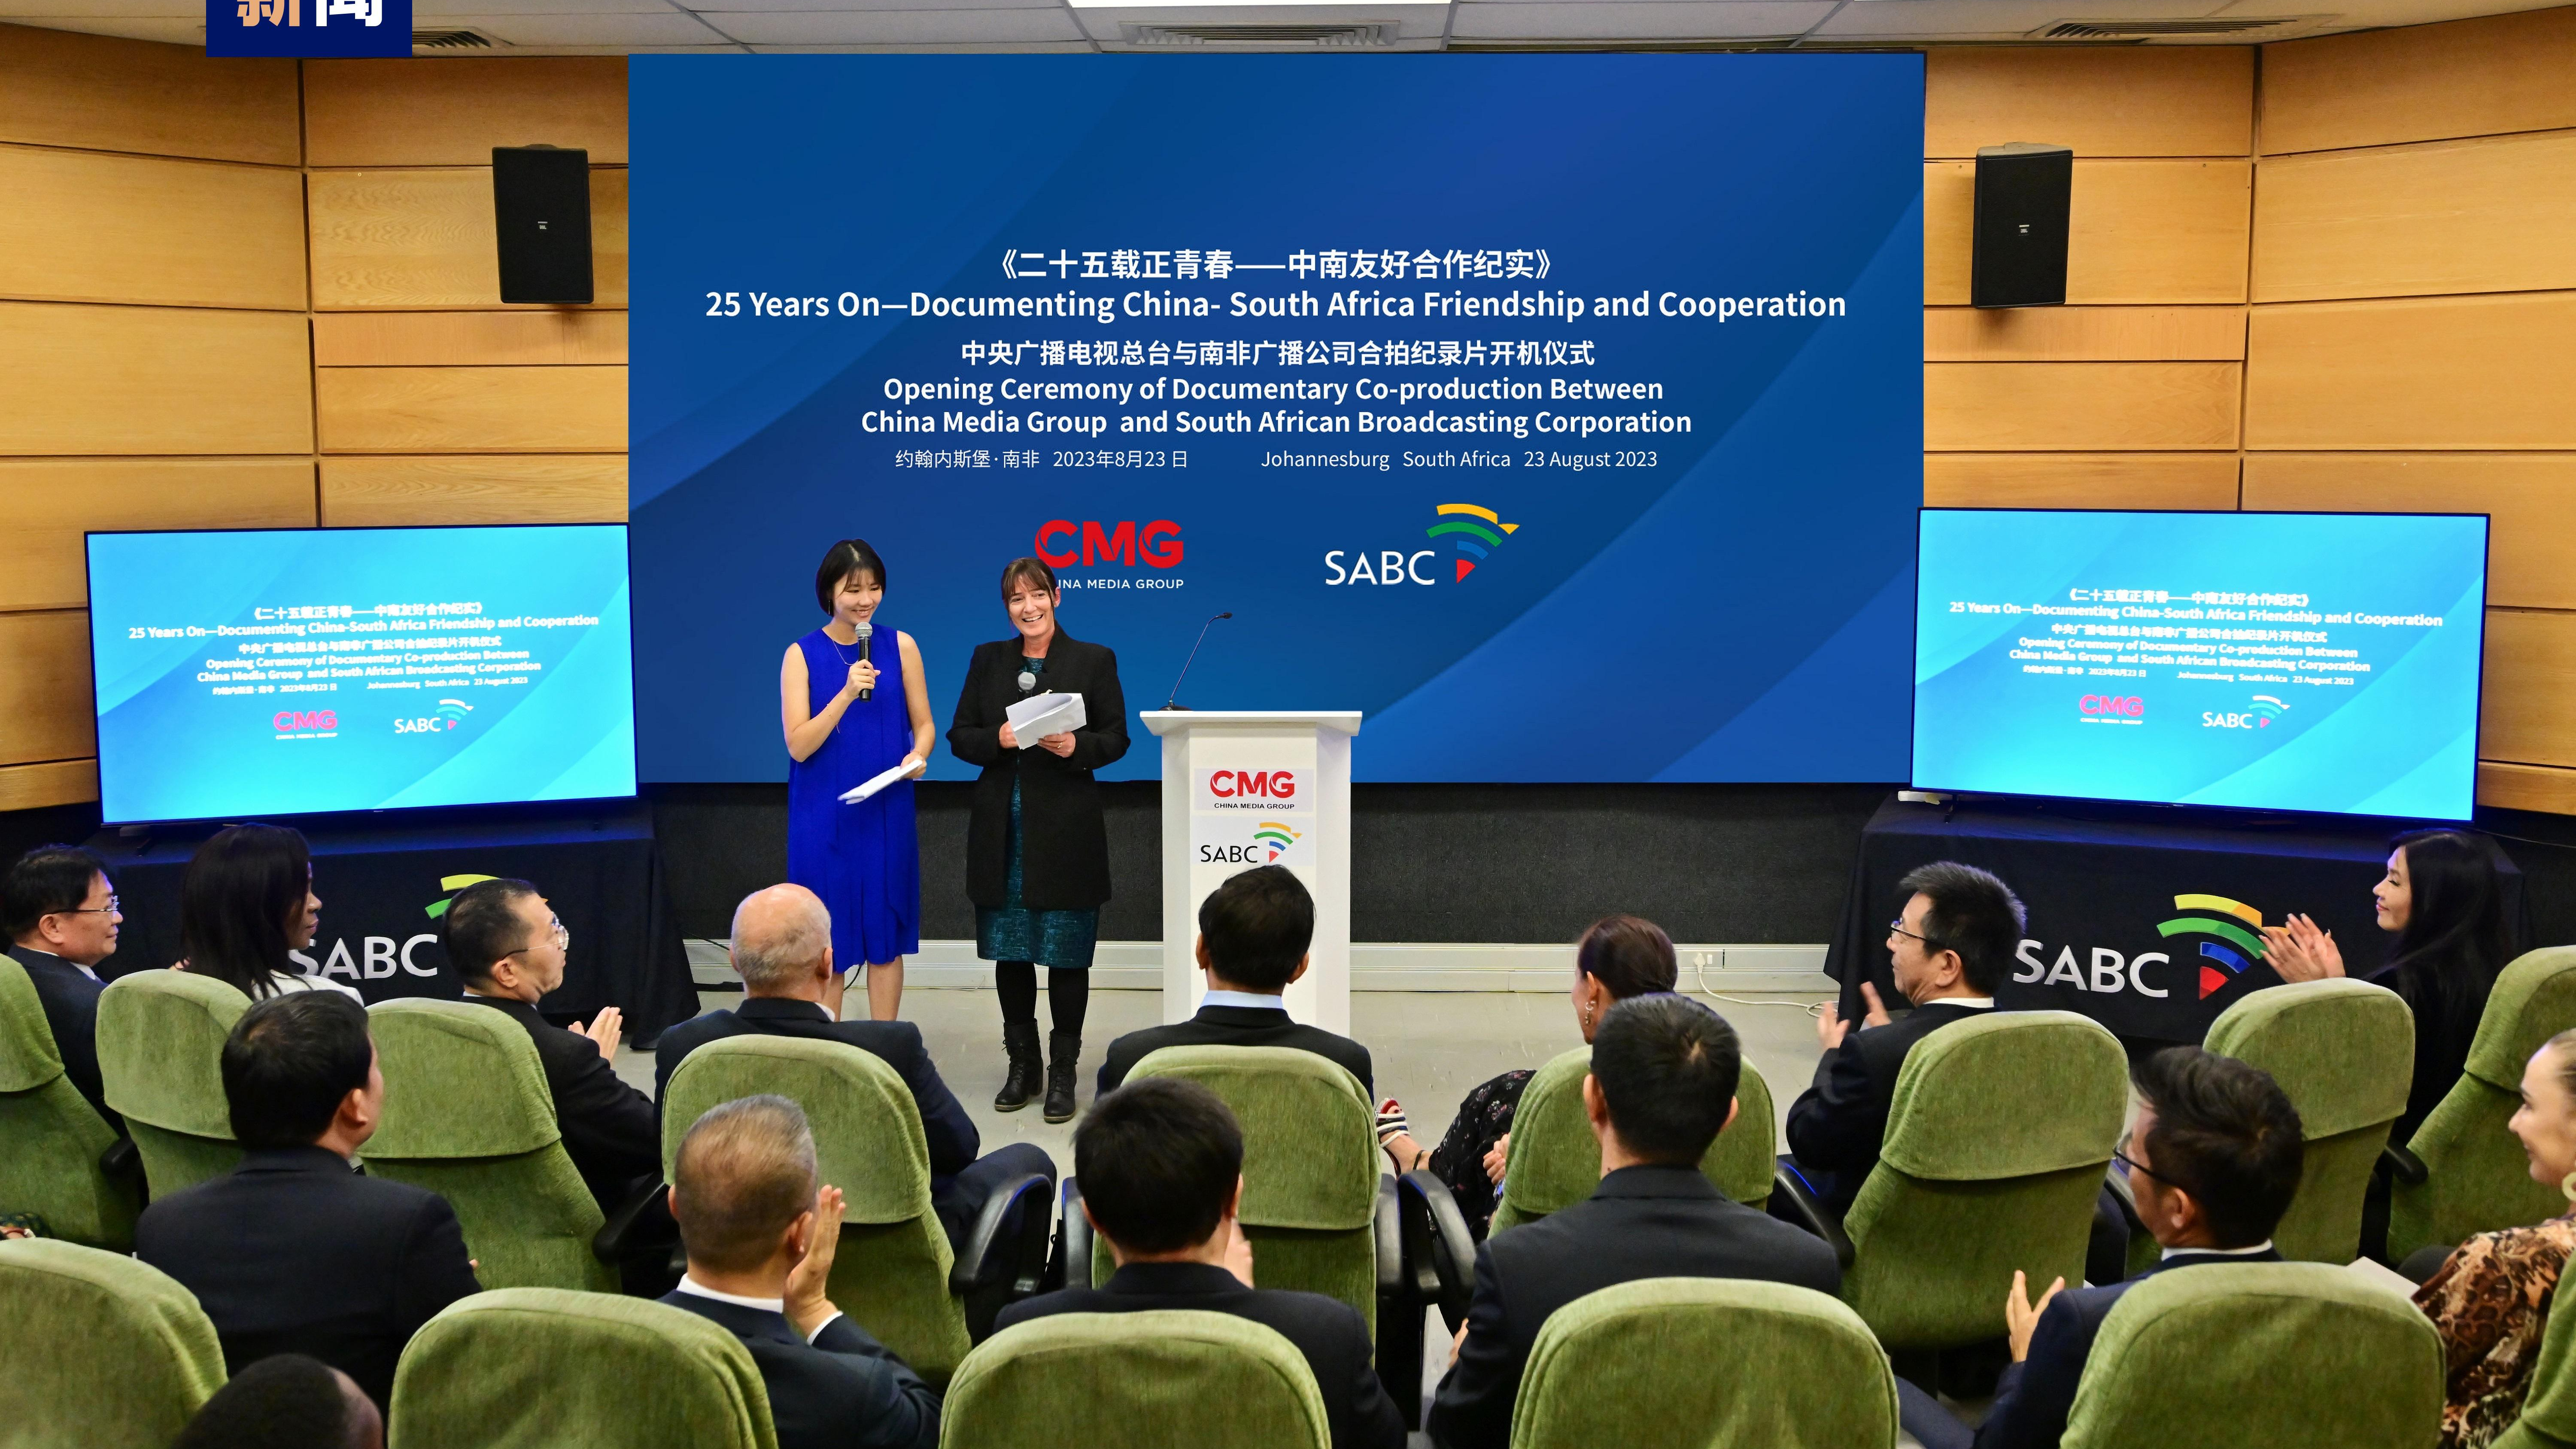 The ceremony announcing the documentary series on China-South Africa brotherly friendship and cooperation is held in Johannesburg, South Africa, August 23, 2023. /CMG